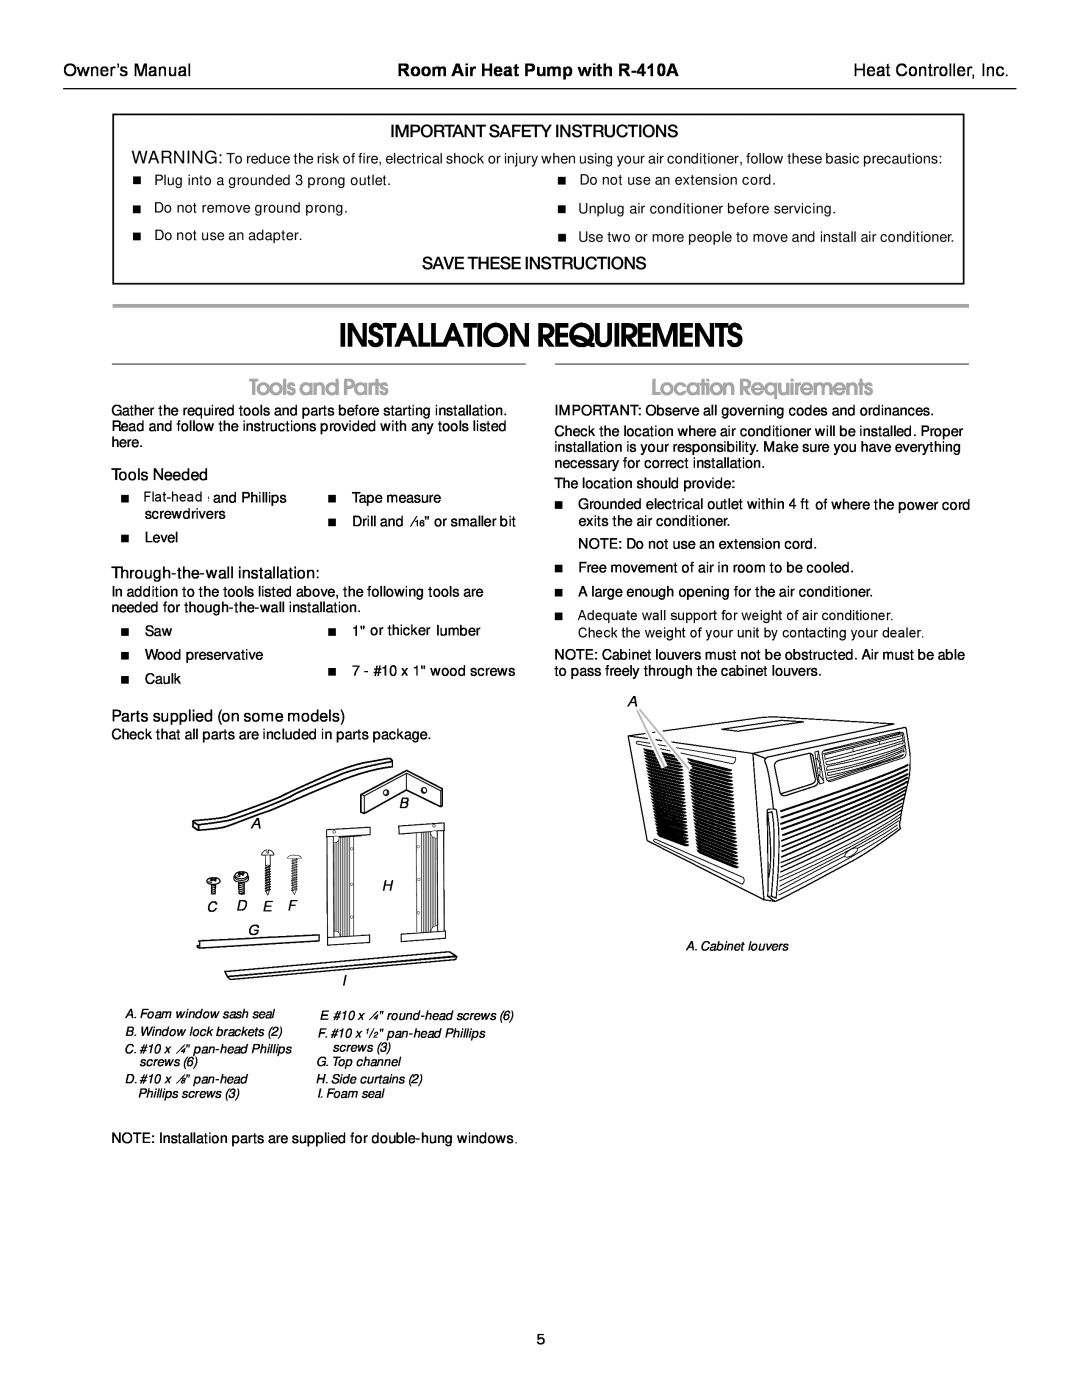 Heat Controller RAH-123G Installation Requirements, Tools and Parts, Location Requirements, Important Safety Instructions 